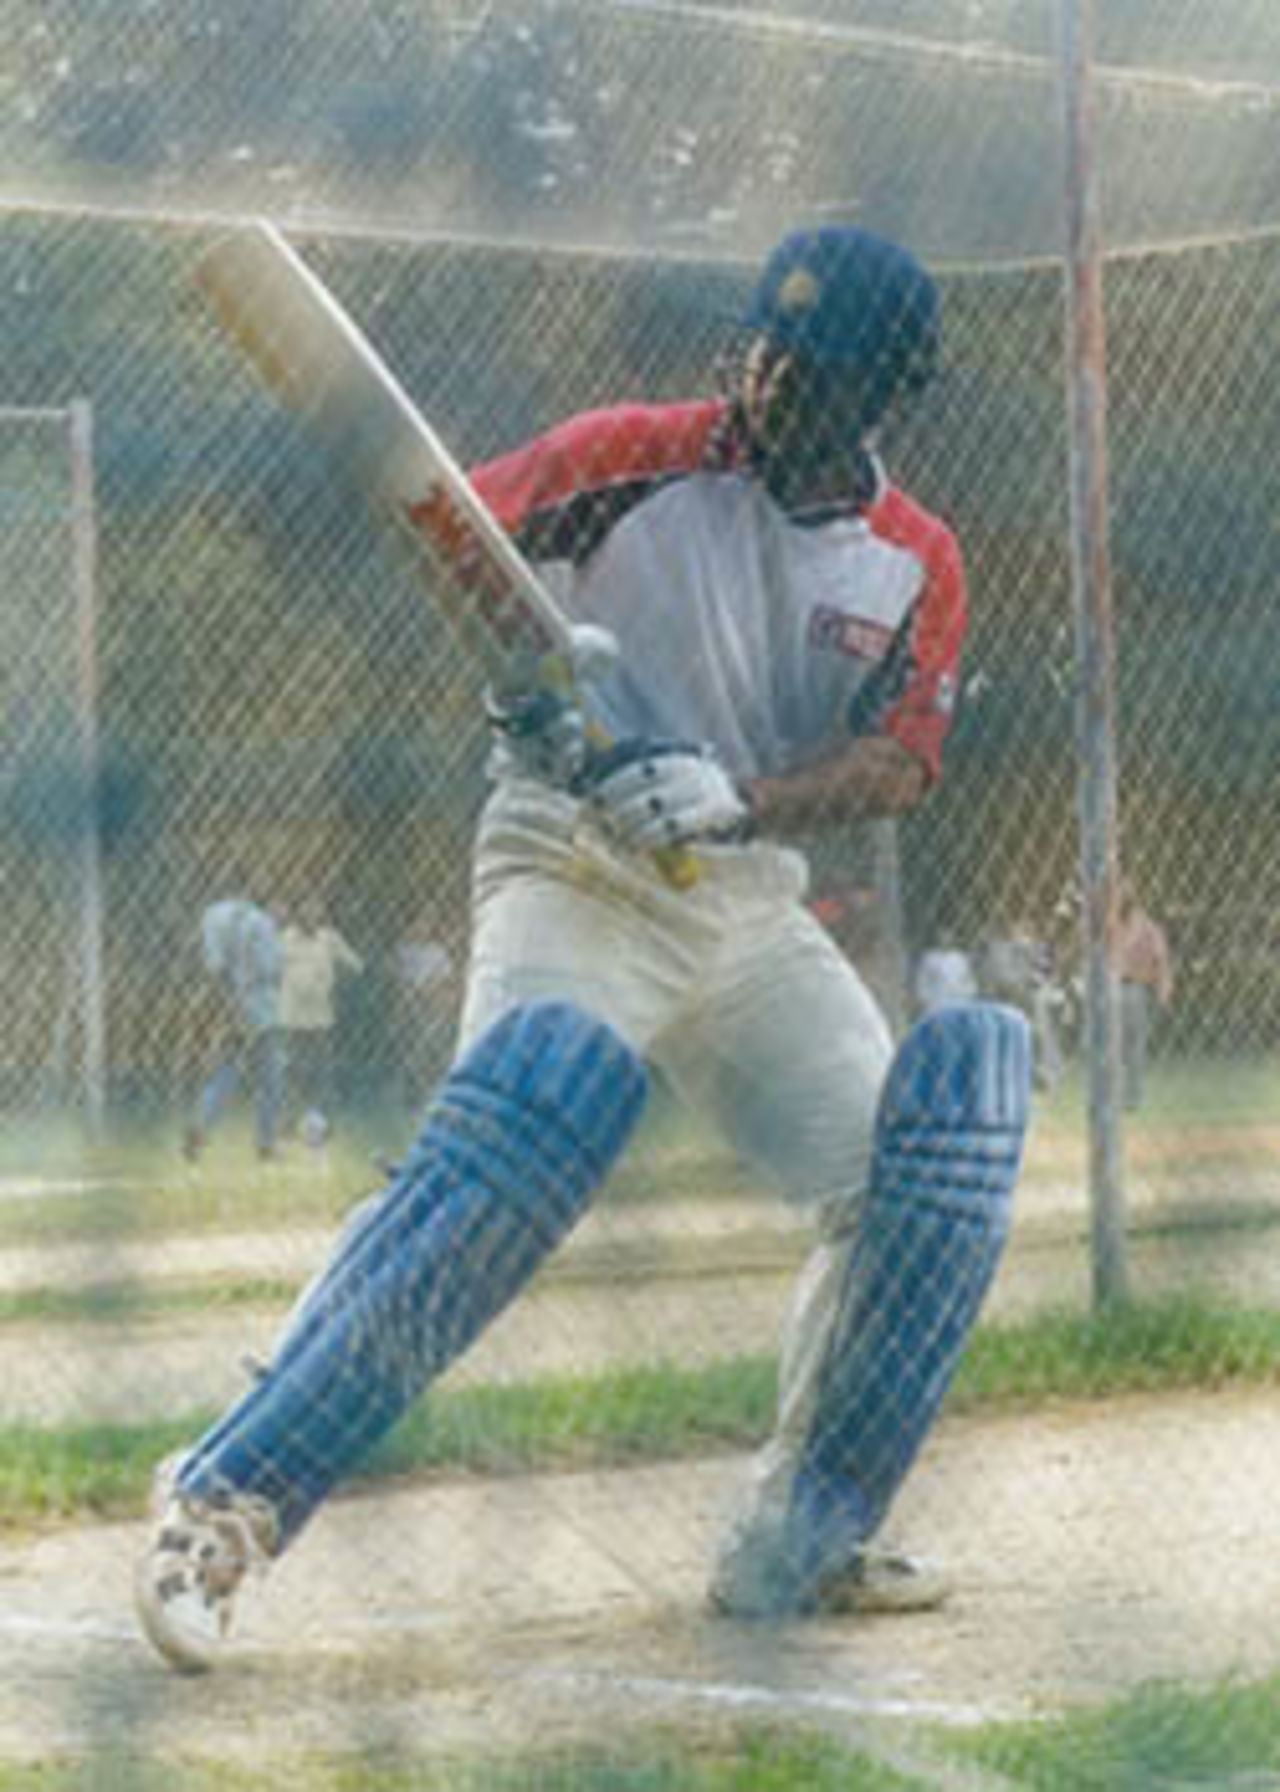 Tendulkar in action at the nets in the MRF pace foundation, MRF Pace Foundation, Chennai, 14 Sep 2000.